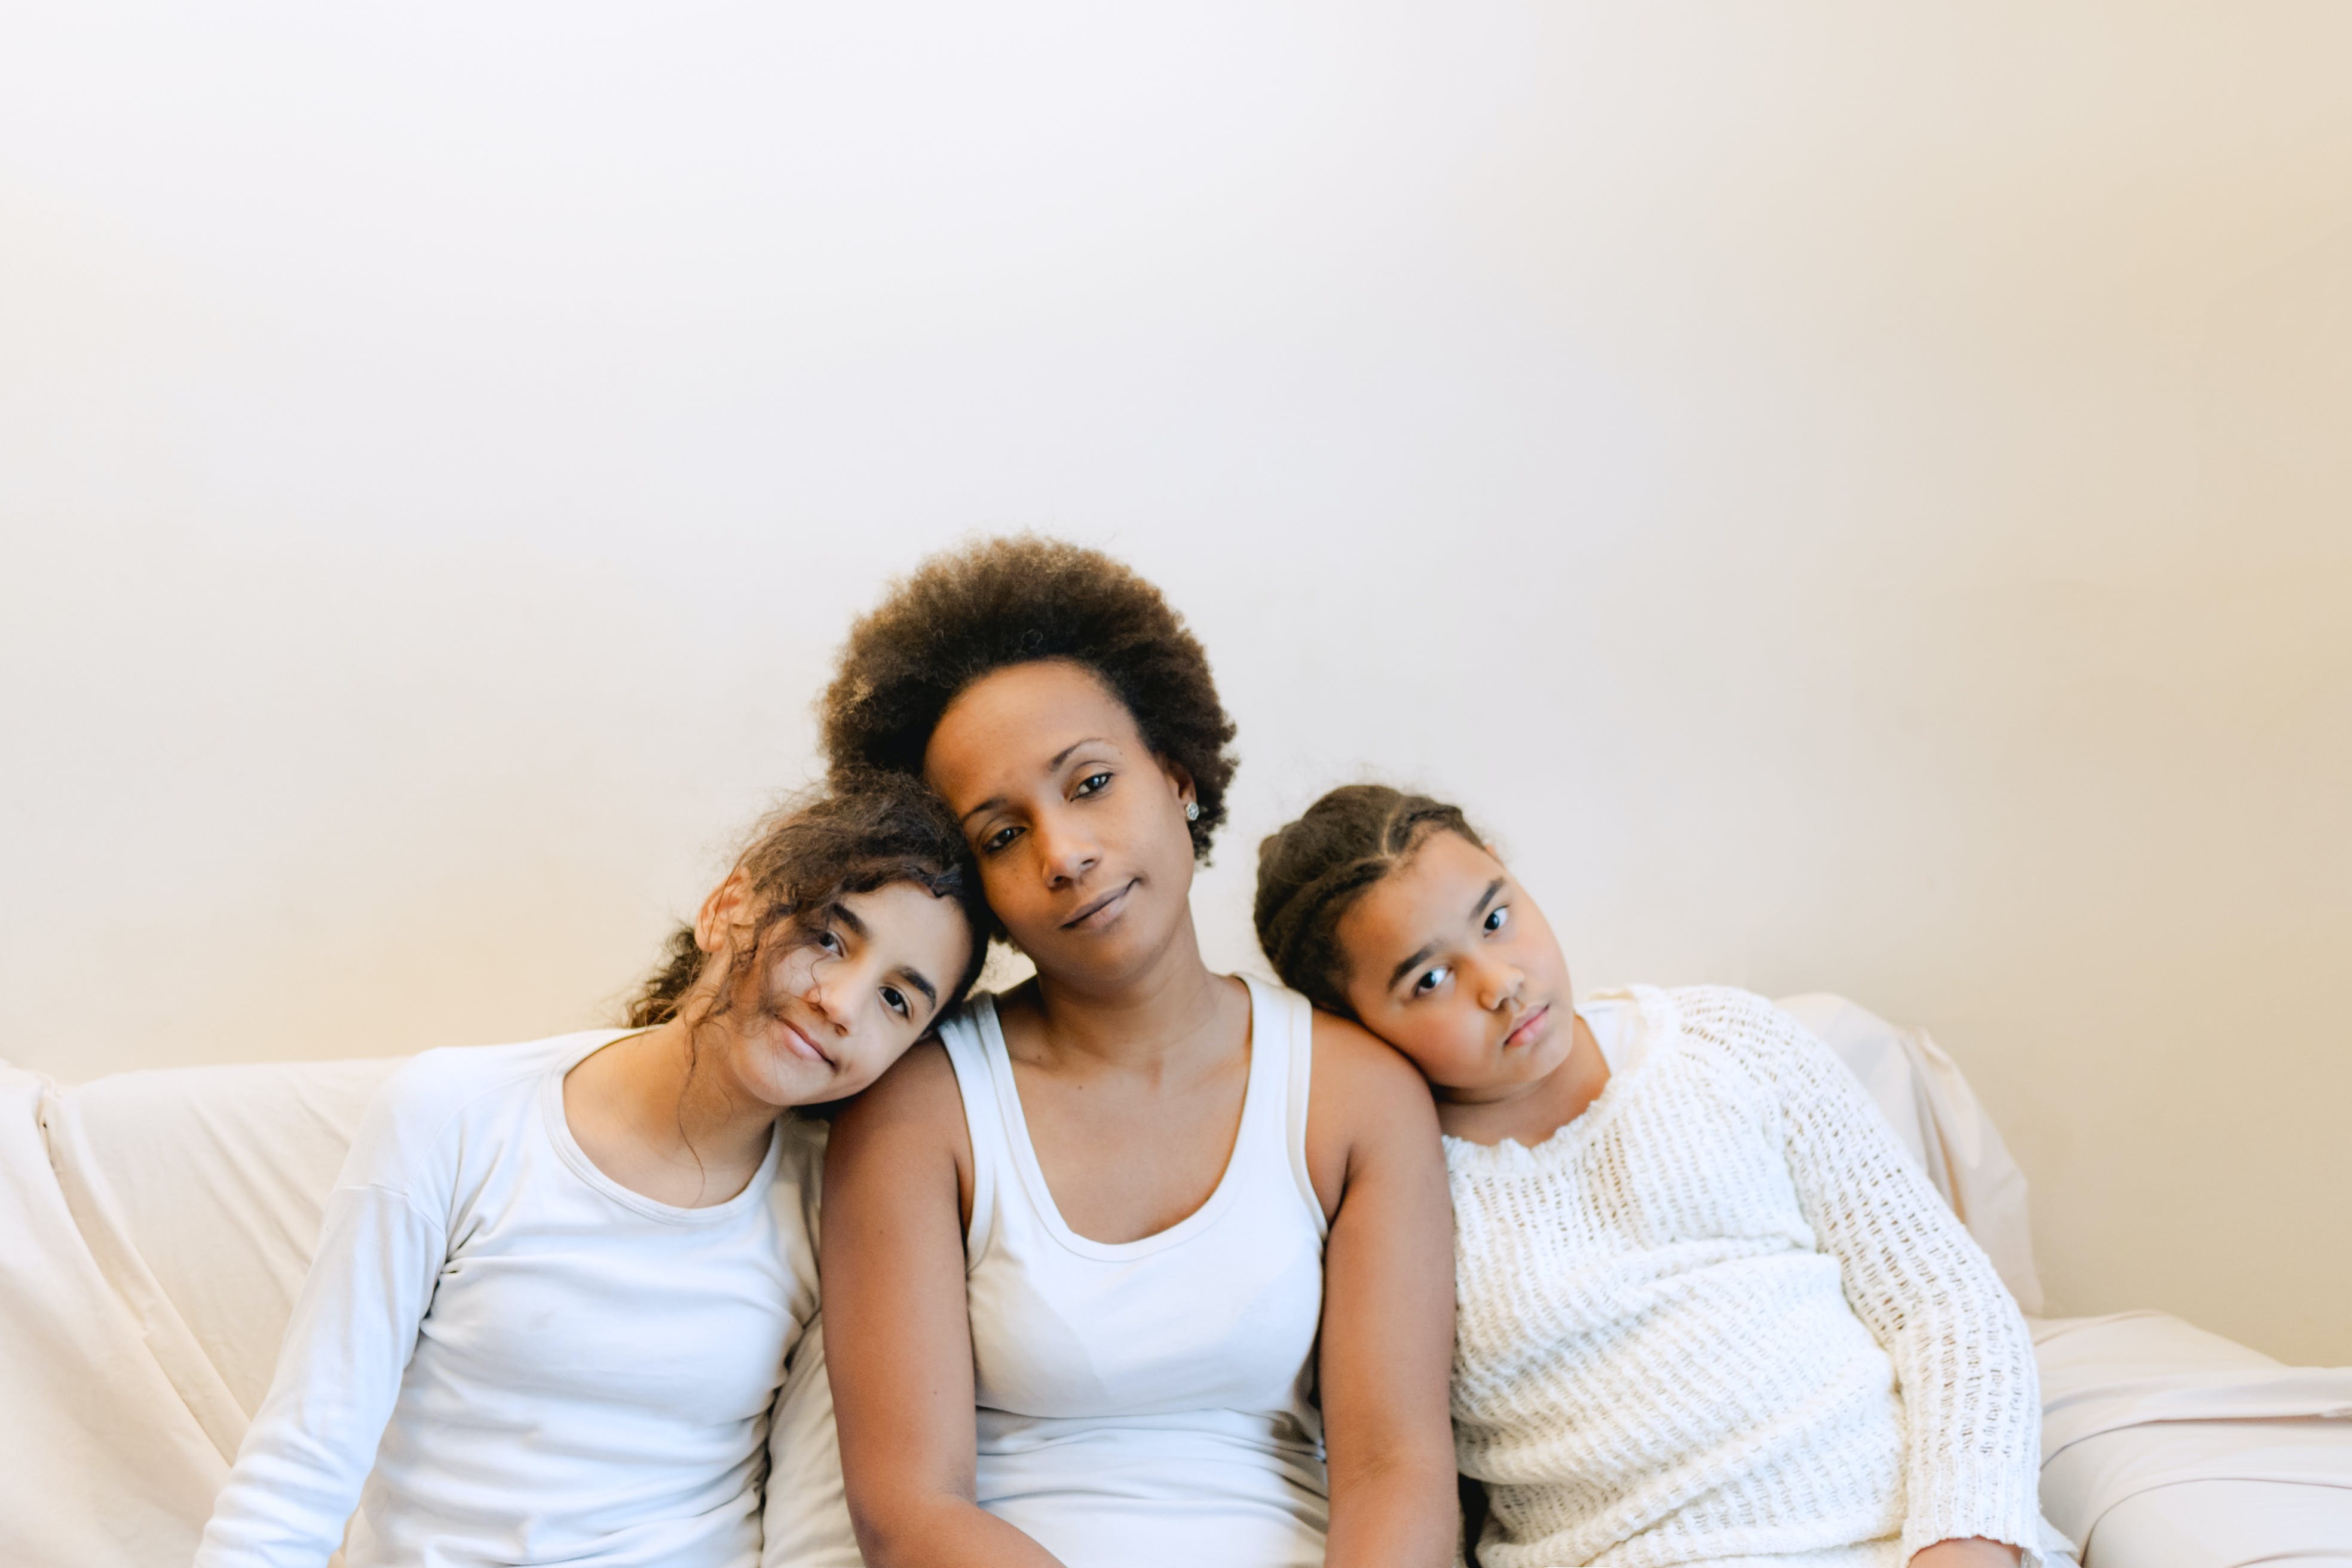 Mother bonding with her daughters. | Source: Pexels